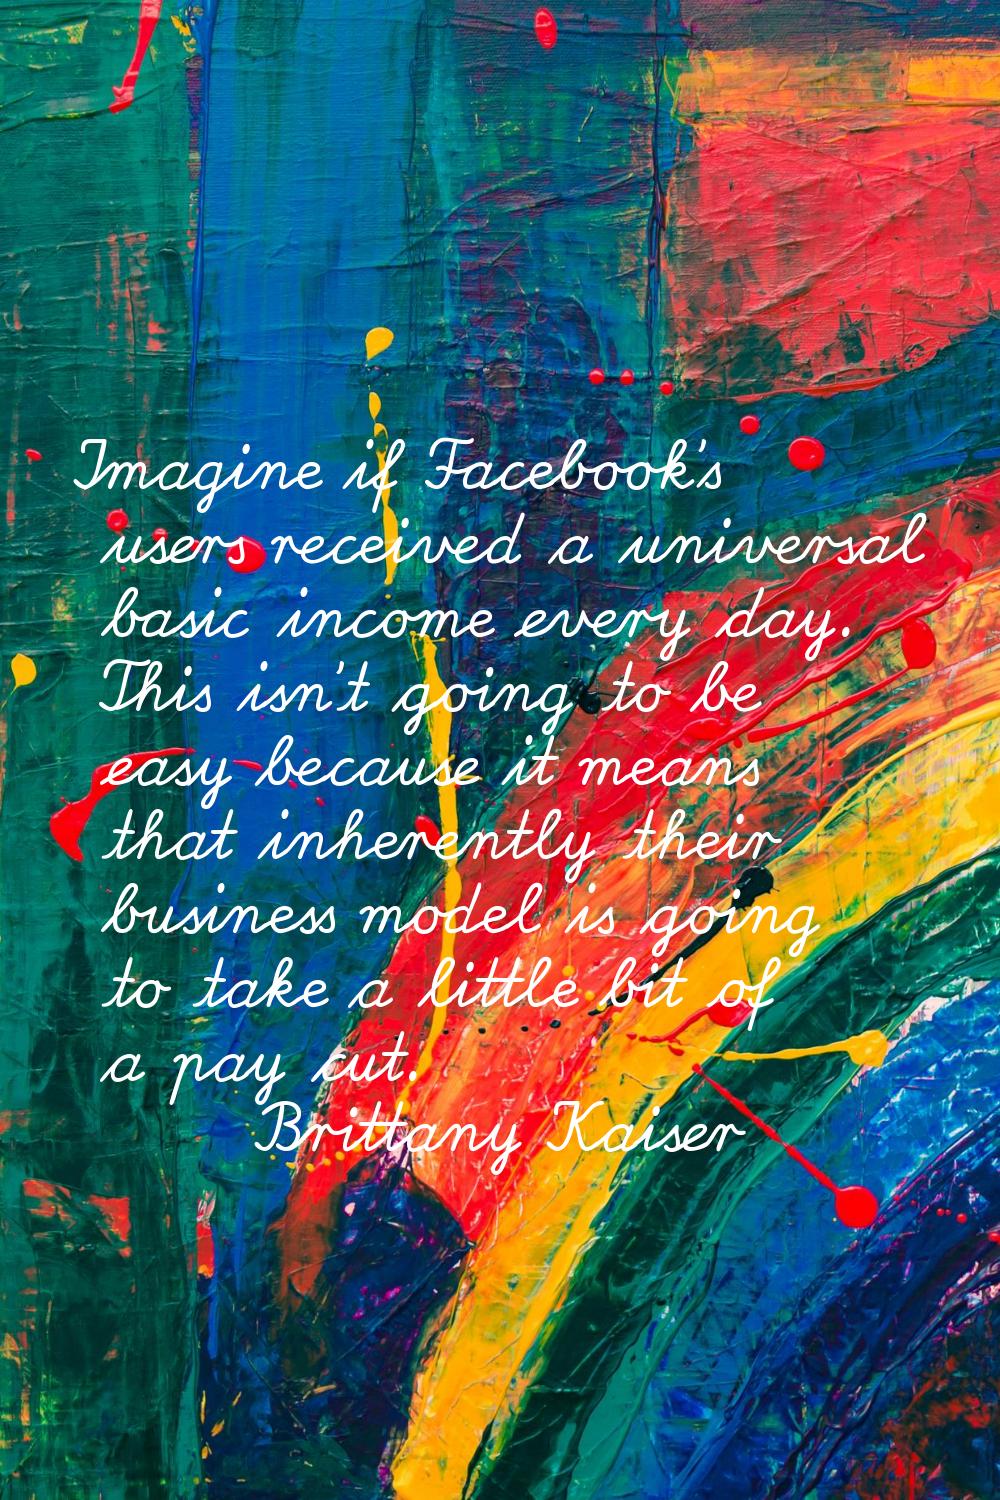 Imagine if Facebook's users received a universal basic income every day. This isn't going to be eas